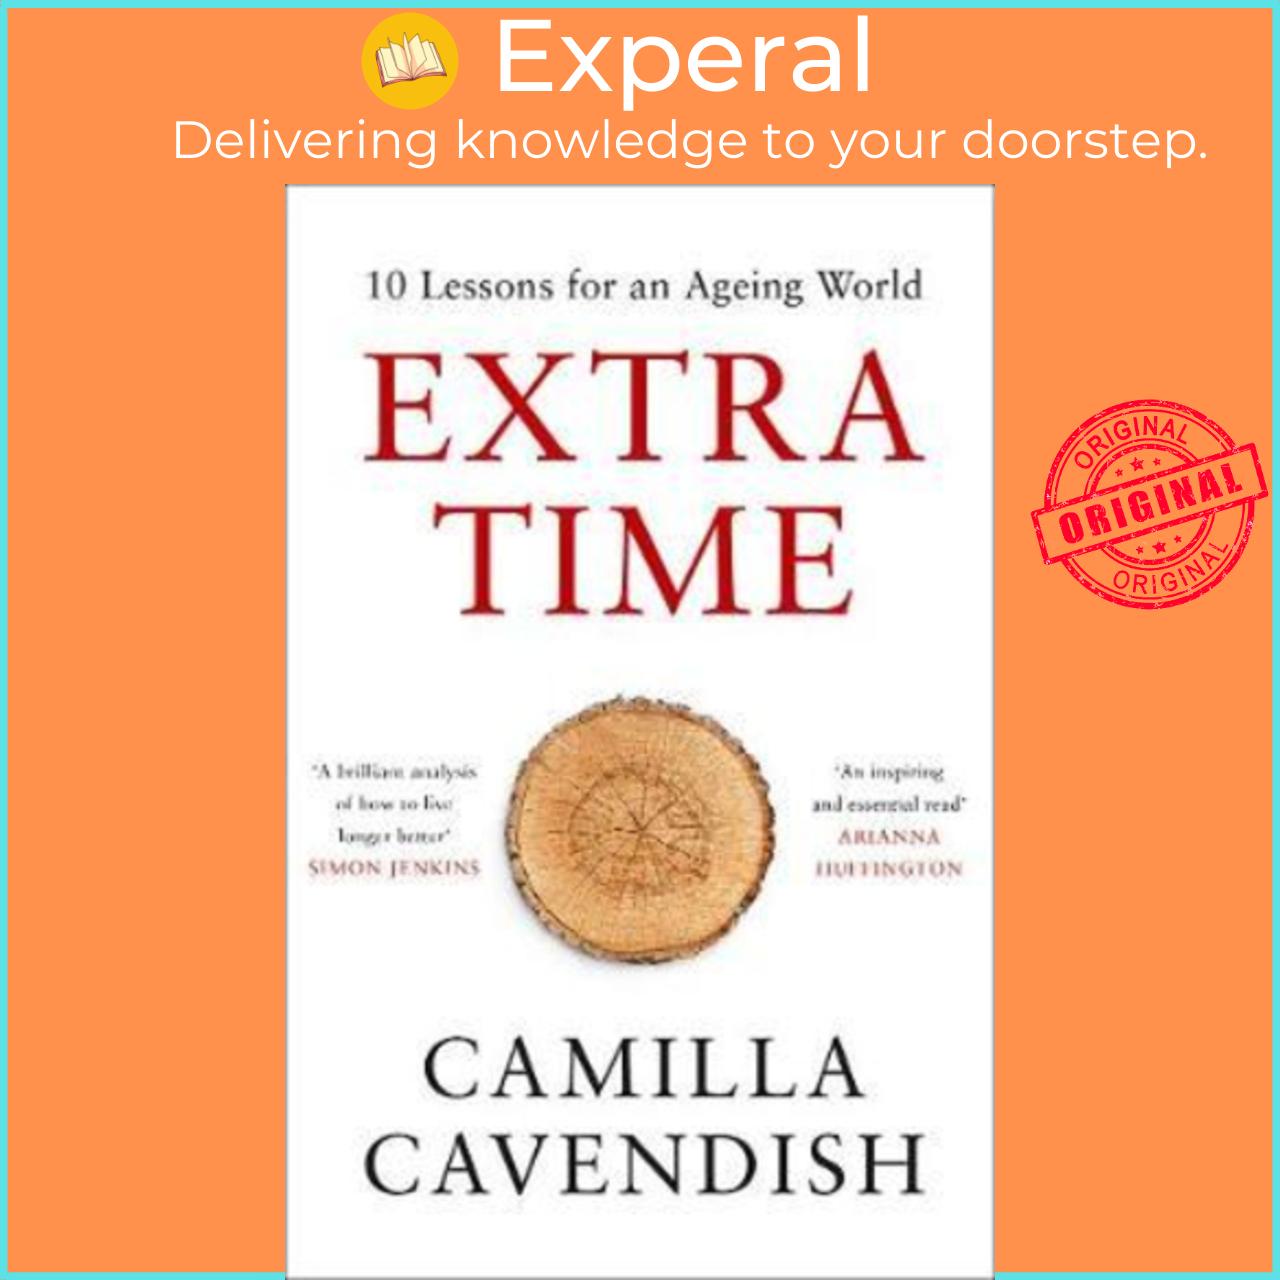 Sách - Extra Time : 10 Lessons for Living Longer Better by Camilla Cavendish (UK edition, paperback)